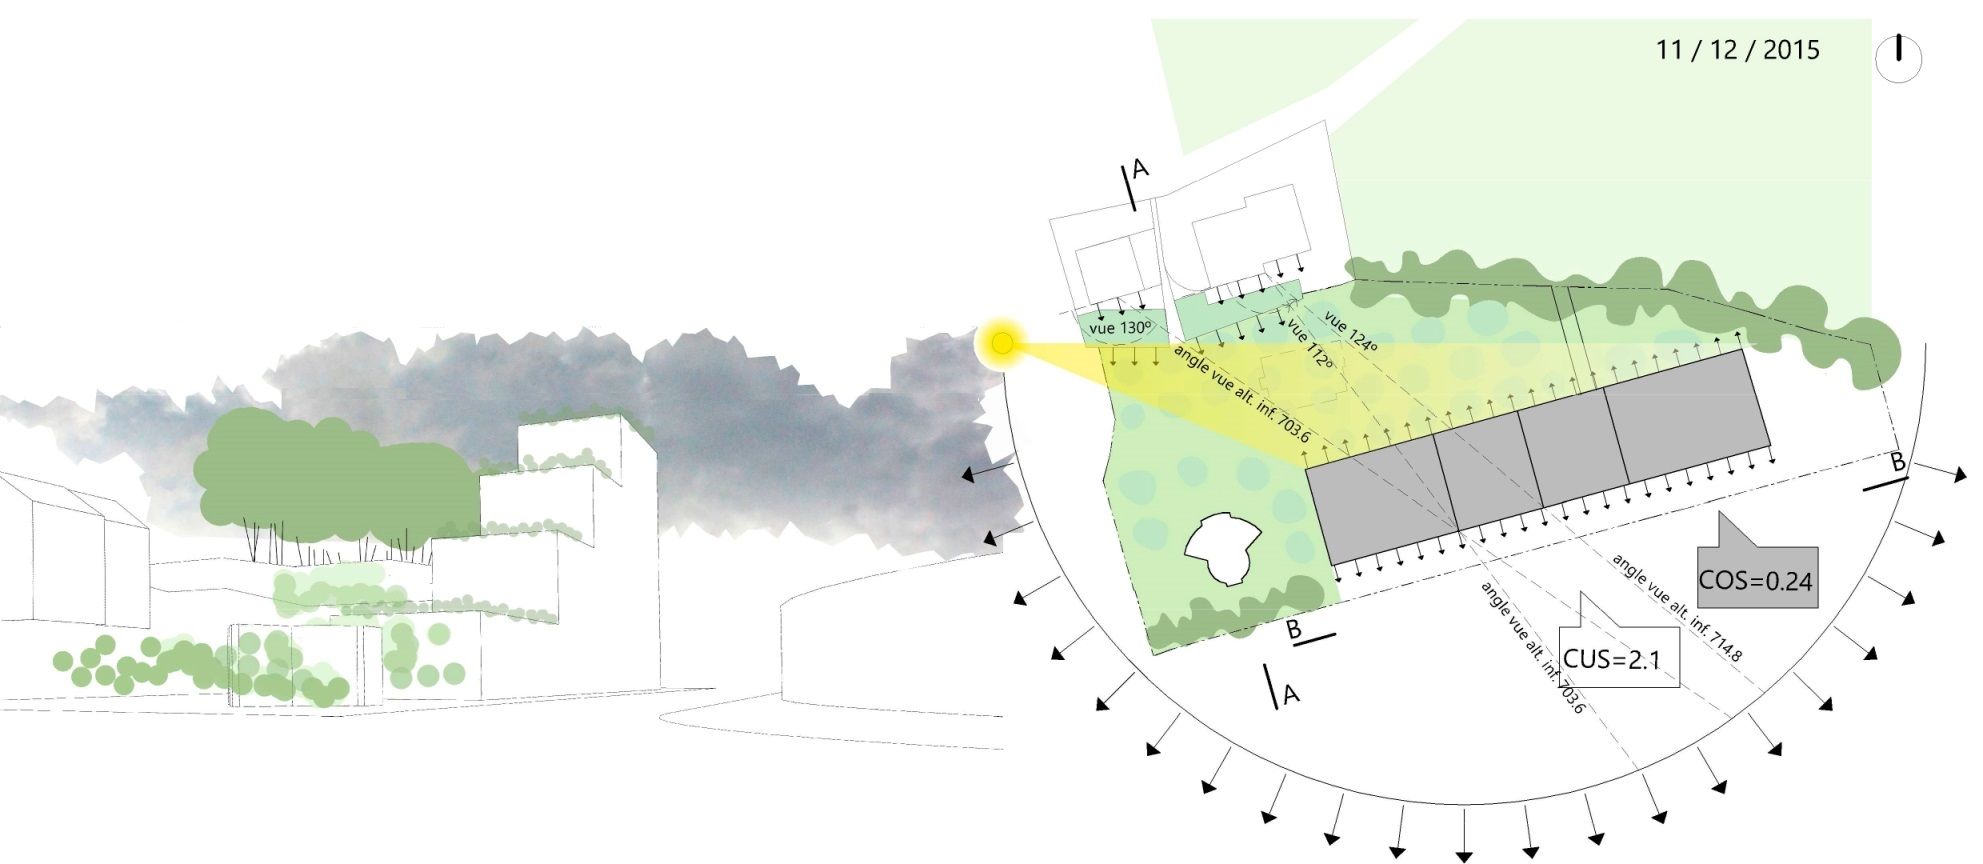 **counter-project 2.1**

* the west to east ascending concept allows the view from the road on the registered woodland cord (to compare with contested project). 

* above the first and second terraces plots 7315 and 7316 preserve their view within angles between 112 to 130 degrees.